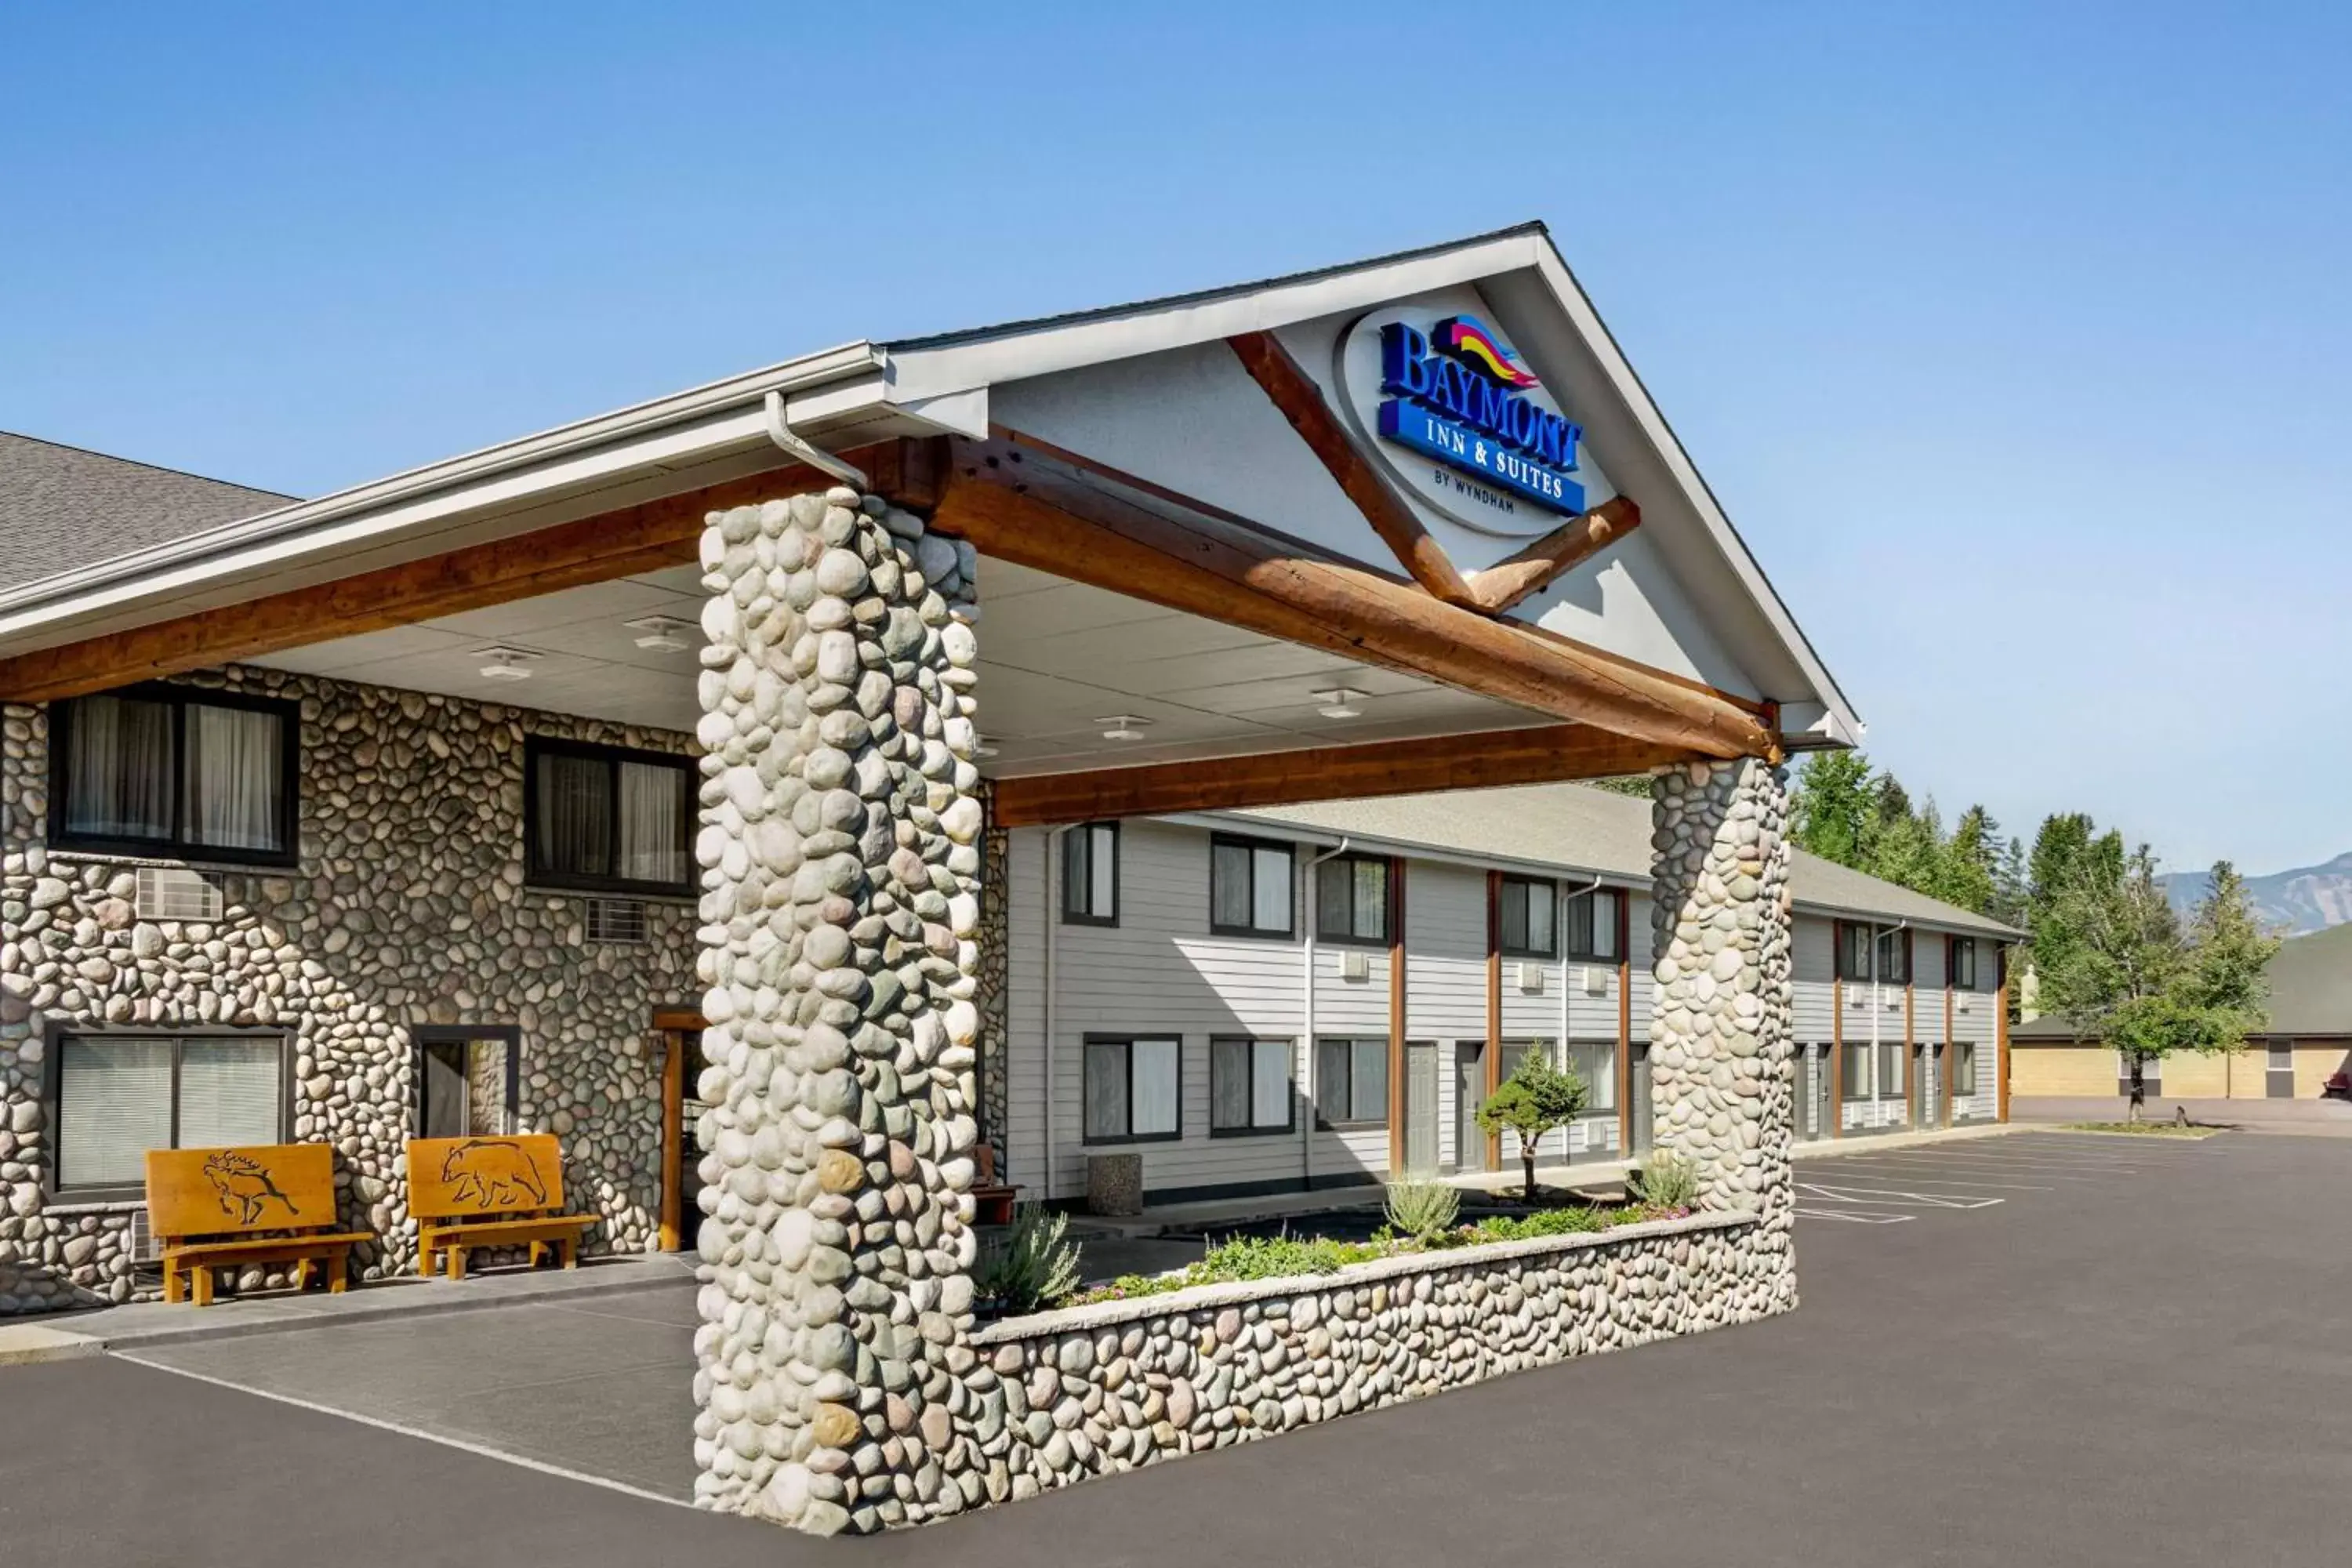 Property Building in Baymont by Wyndham Whitefish